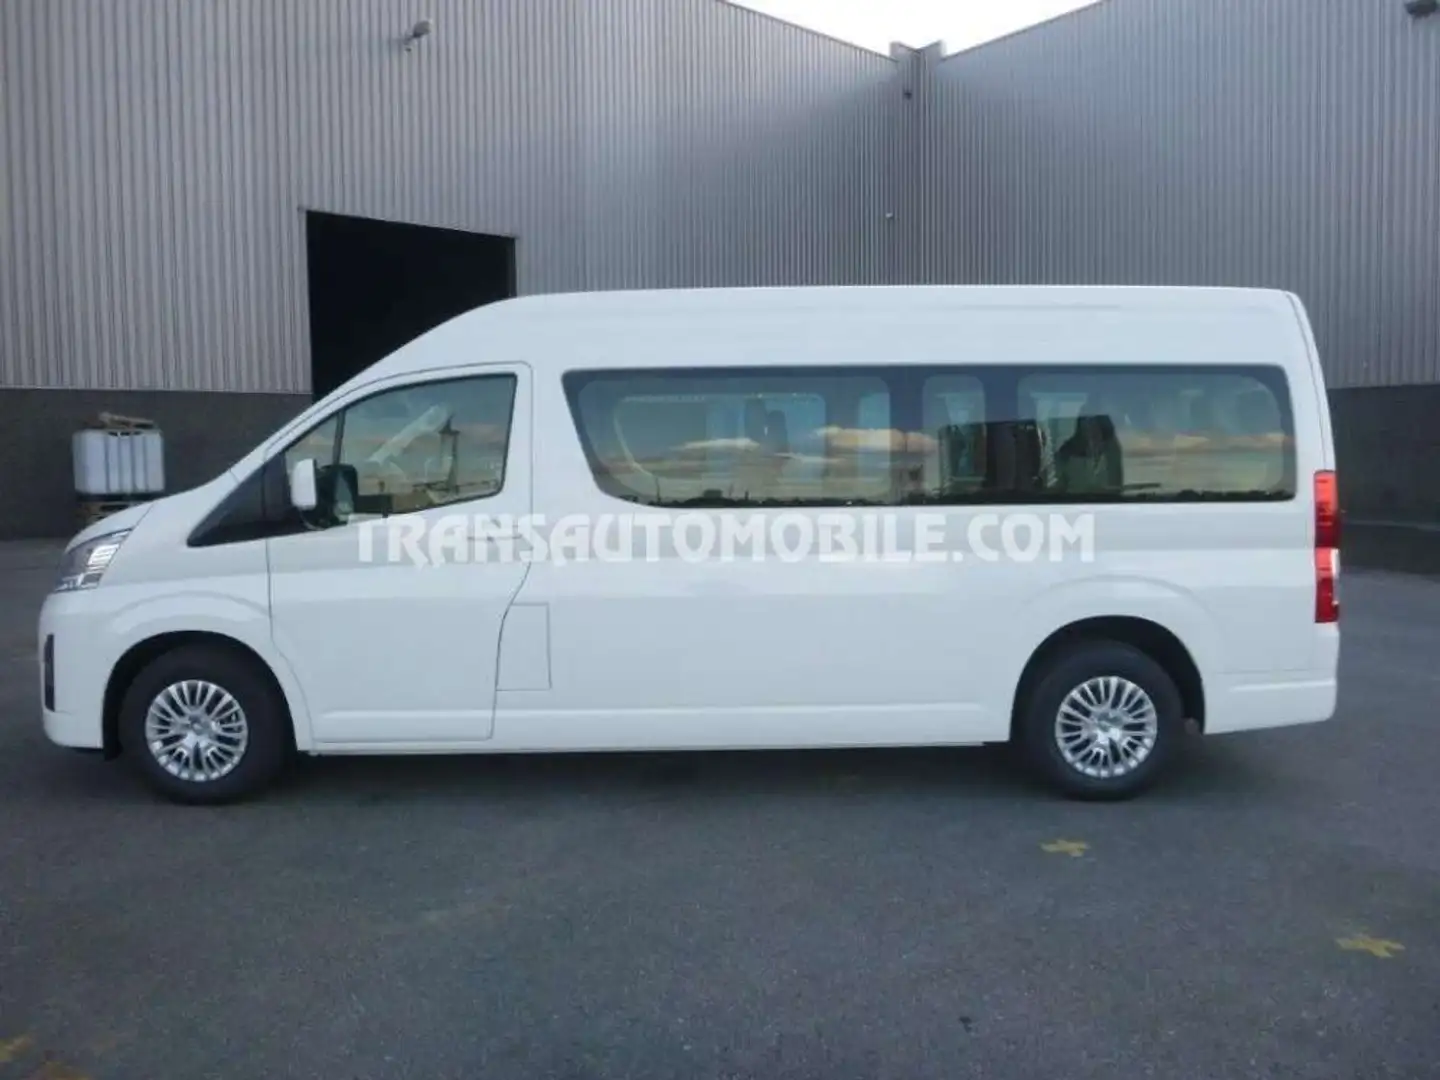 Toyota Hiace HIGH ROOF / TOIT HAUT - EXPORT OUT EU TROPICAL VER White - 2